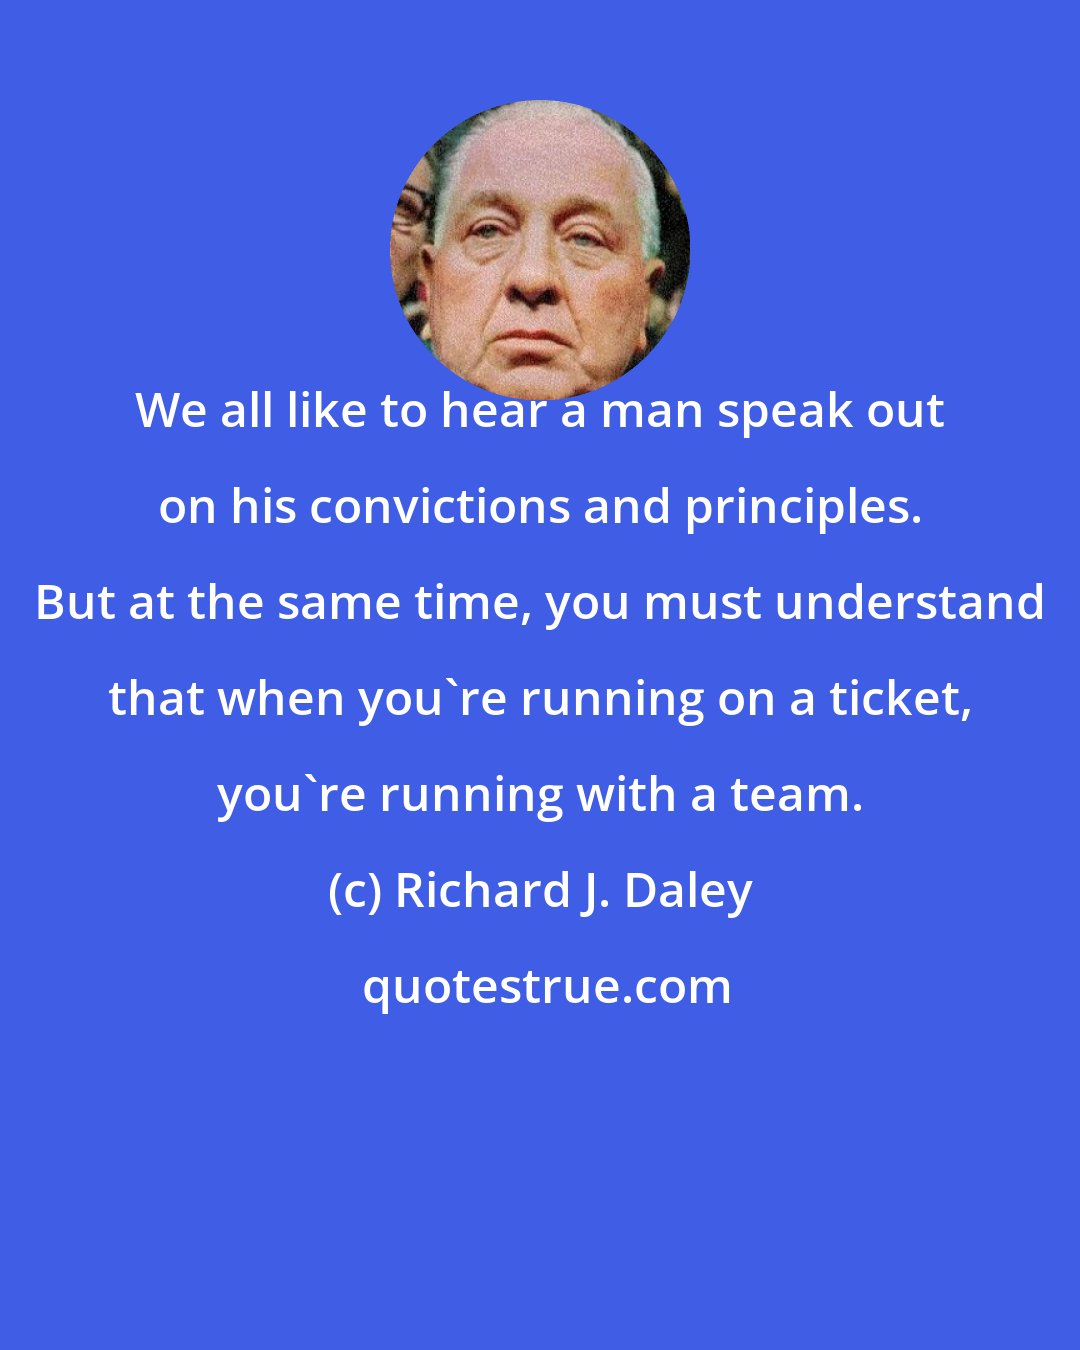 Richard J. Daley: We all like to hear a man speak out on his convictions and principles. But at the same time, you must understand that when you're running on a ticket, you're running with a team.